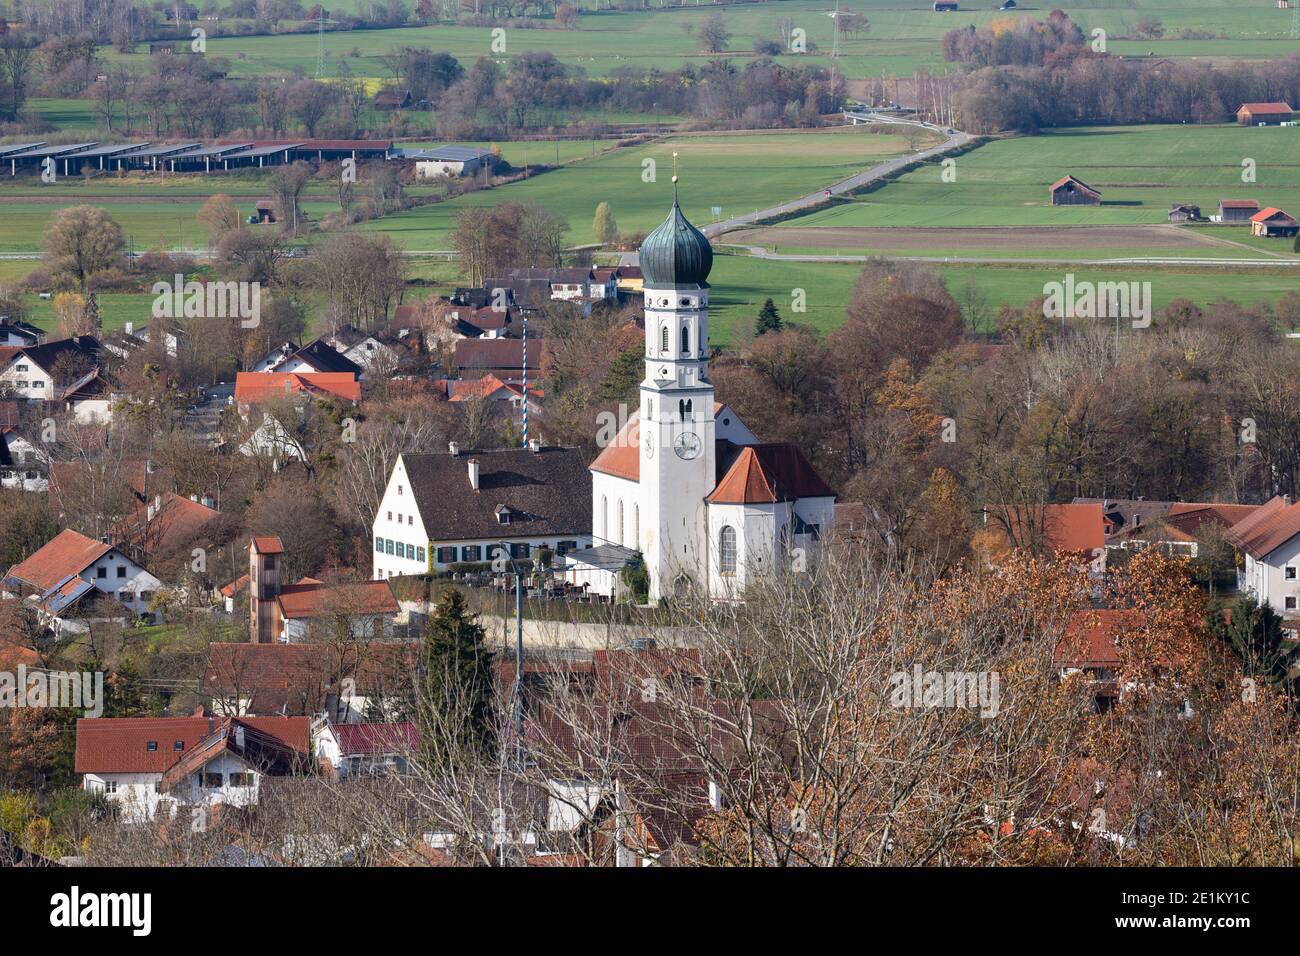 Pähl, Germany - Nov 13, 2020: View on St. Laurentius. Typical catholic church in upper bavaria. Located in the town center of Pähl. Stock Photo